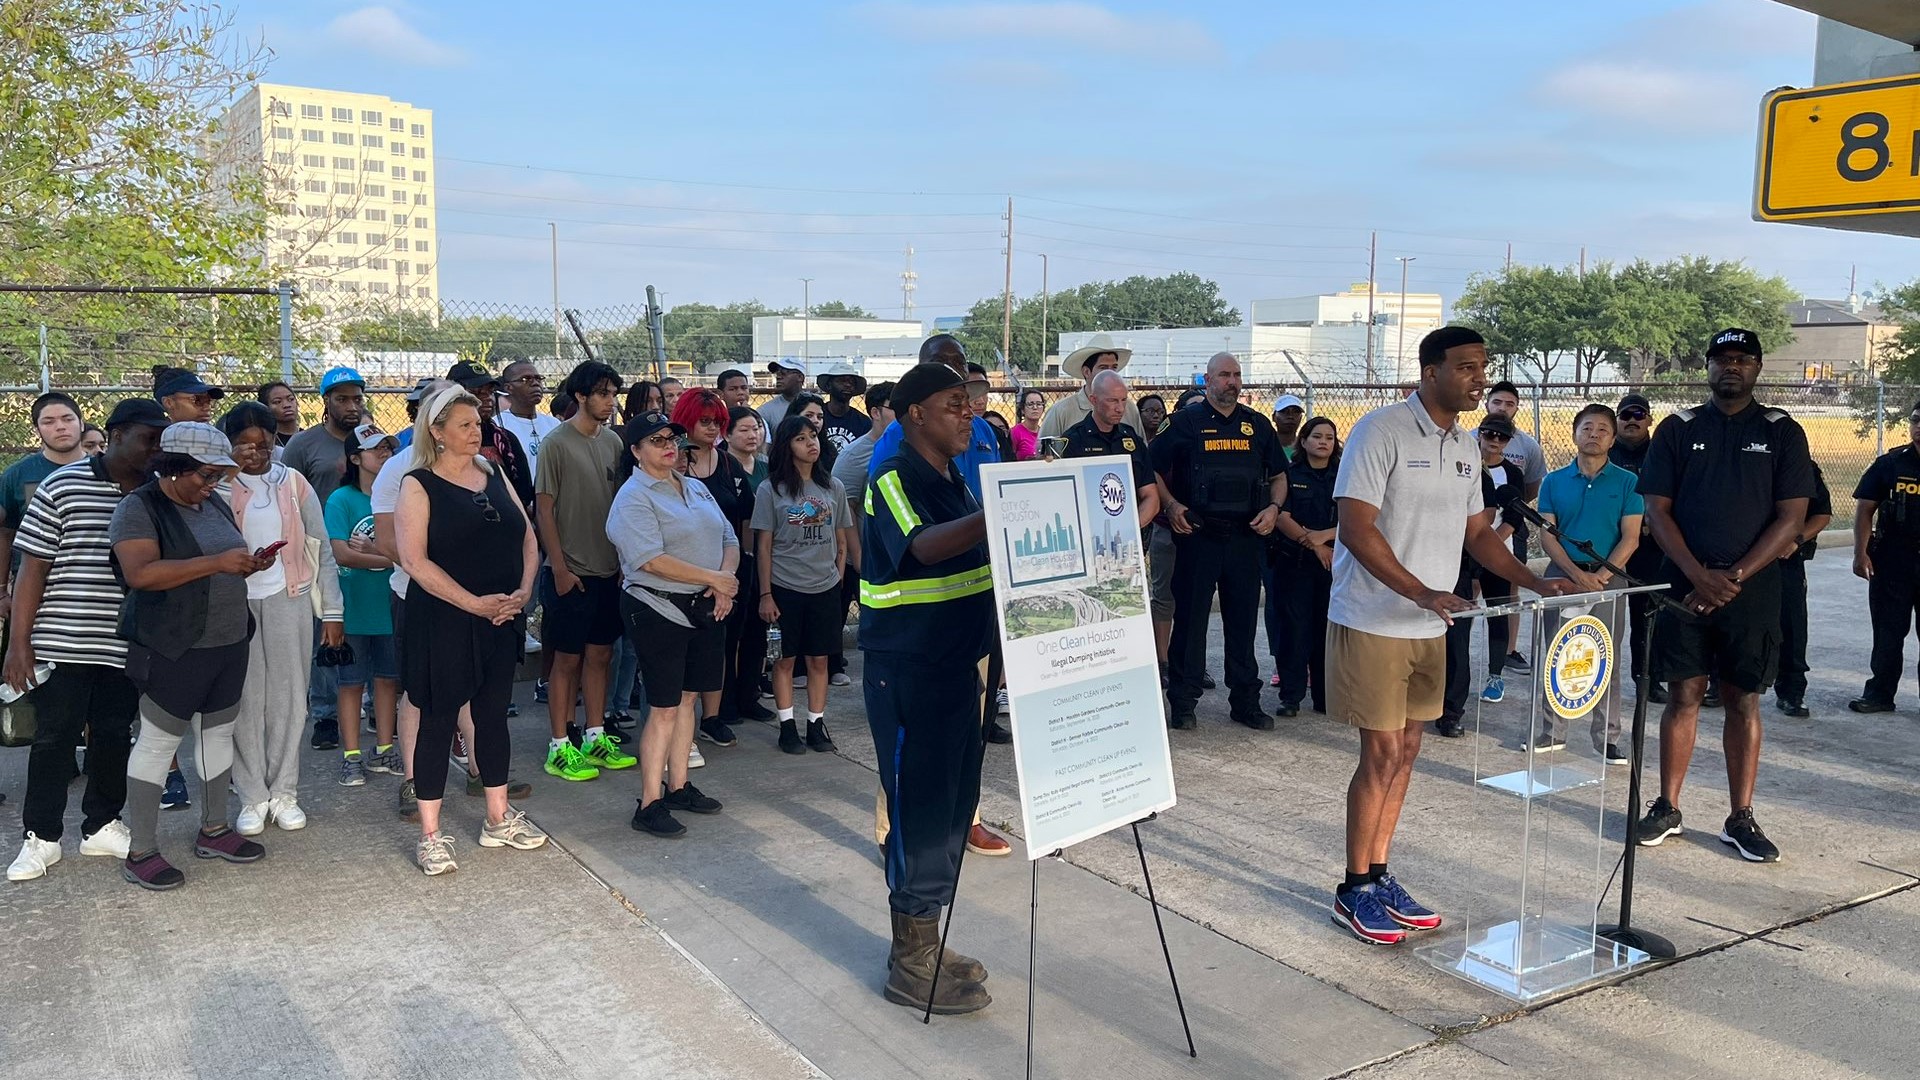 The event is part of Mayor Sylvester Turner's One Clean Houston initiative and people from the area are hoping the cleanup has a positive impact.